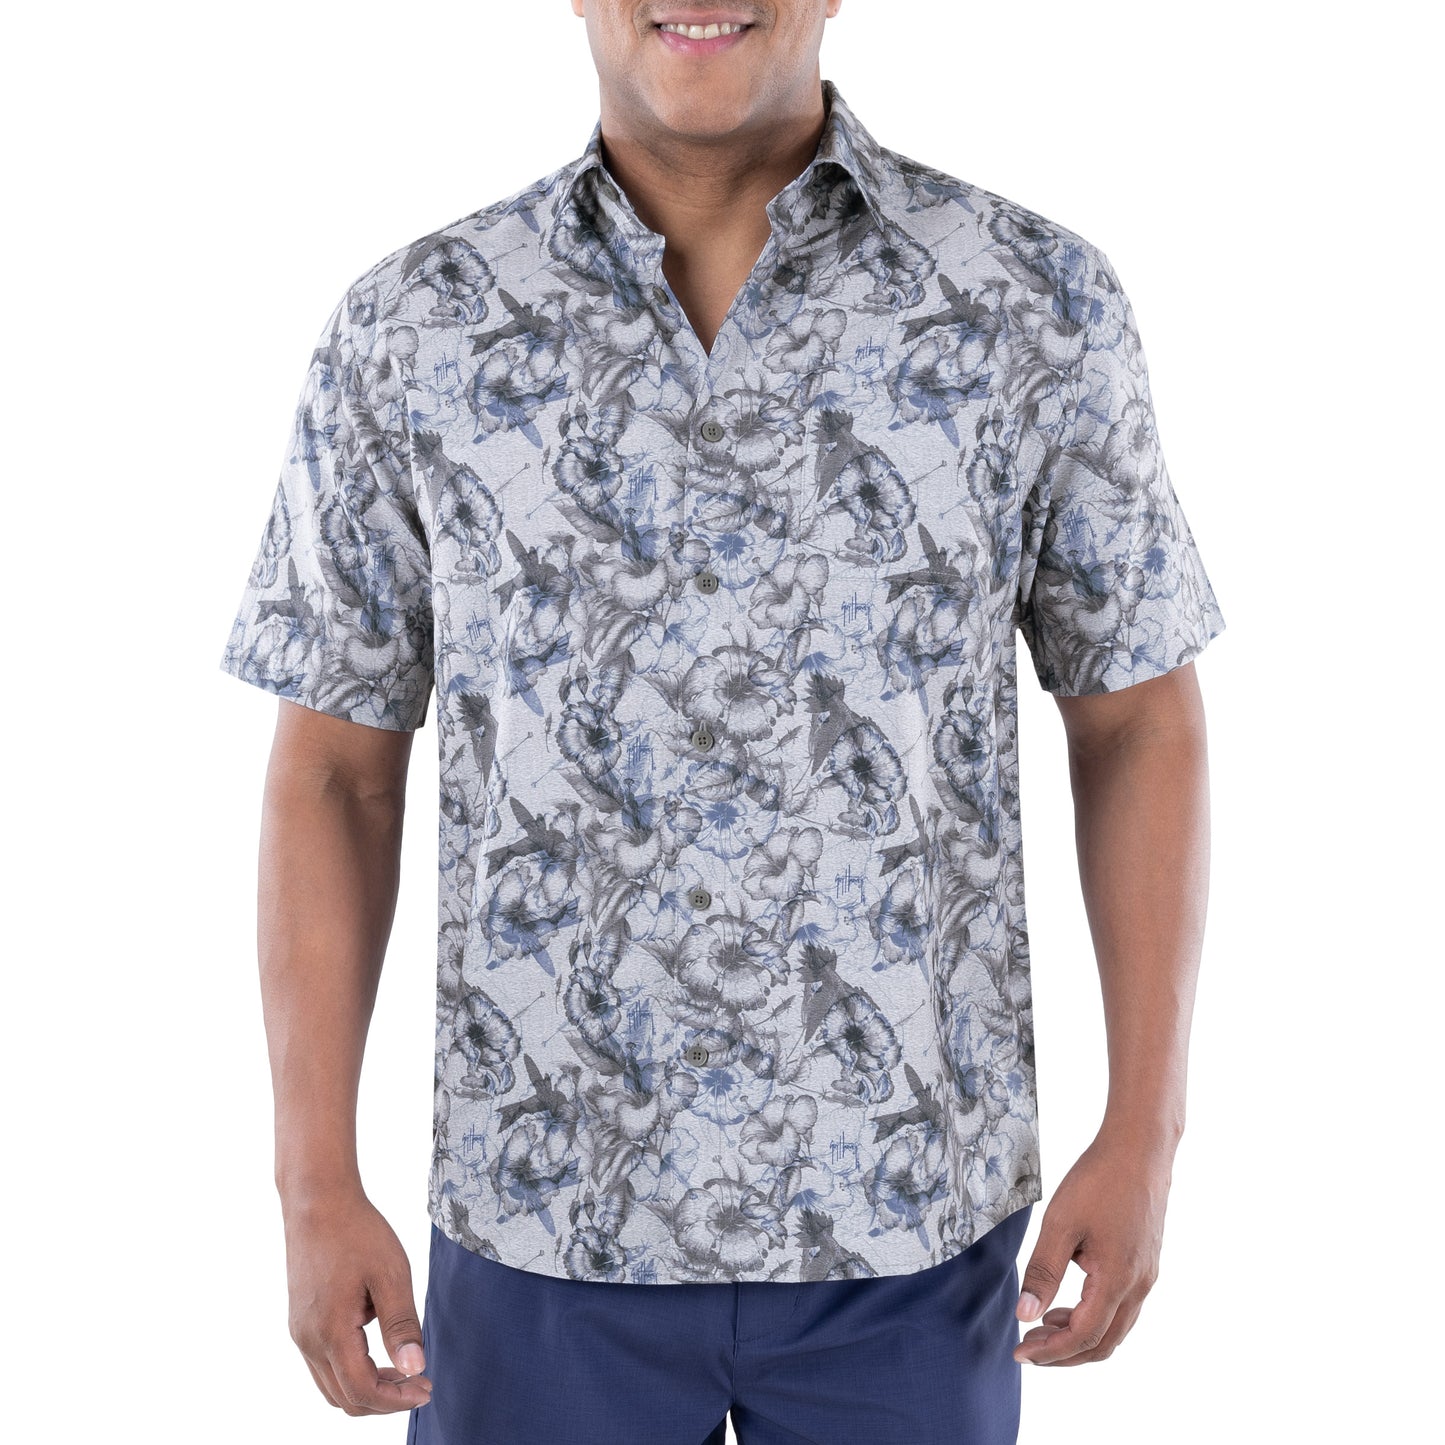 Short Sleeve Fishing Shirt with Printed Hibiscus Pattern in Gray - Front View View 1